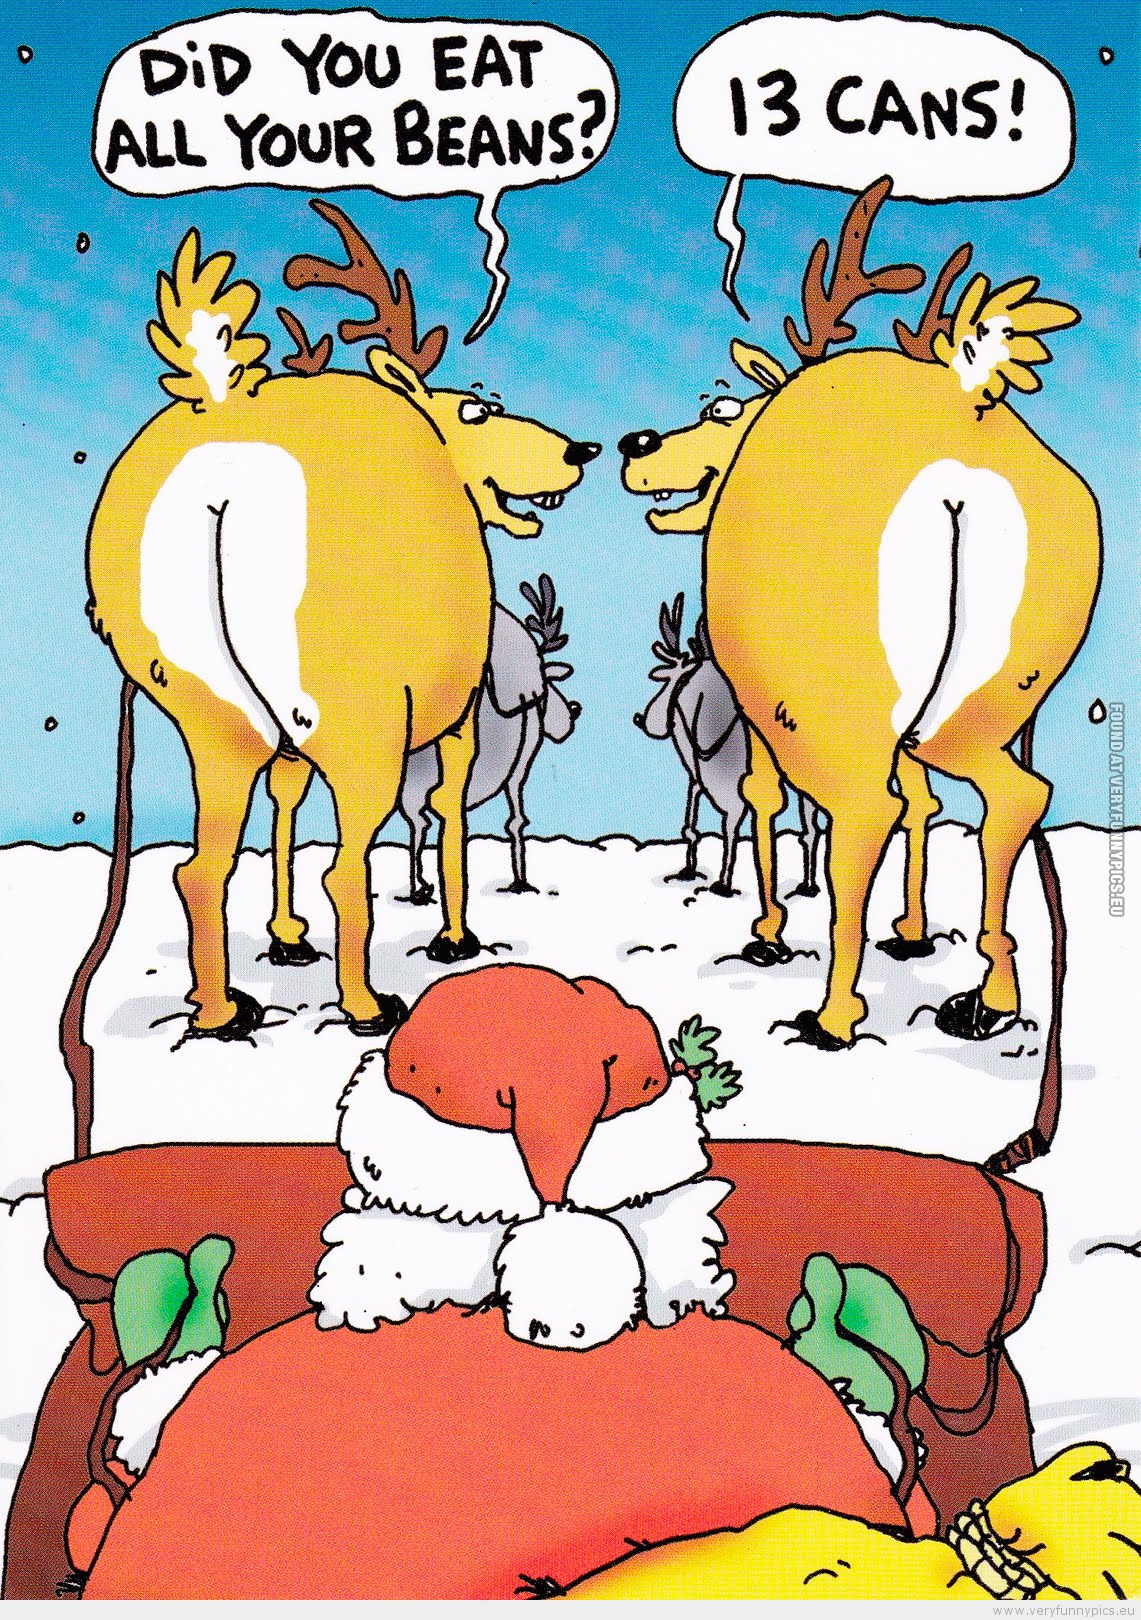 Funny Picture - Santa sitting behind reindeers. Did you eat all your beans? 13 cans!